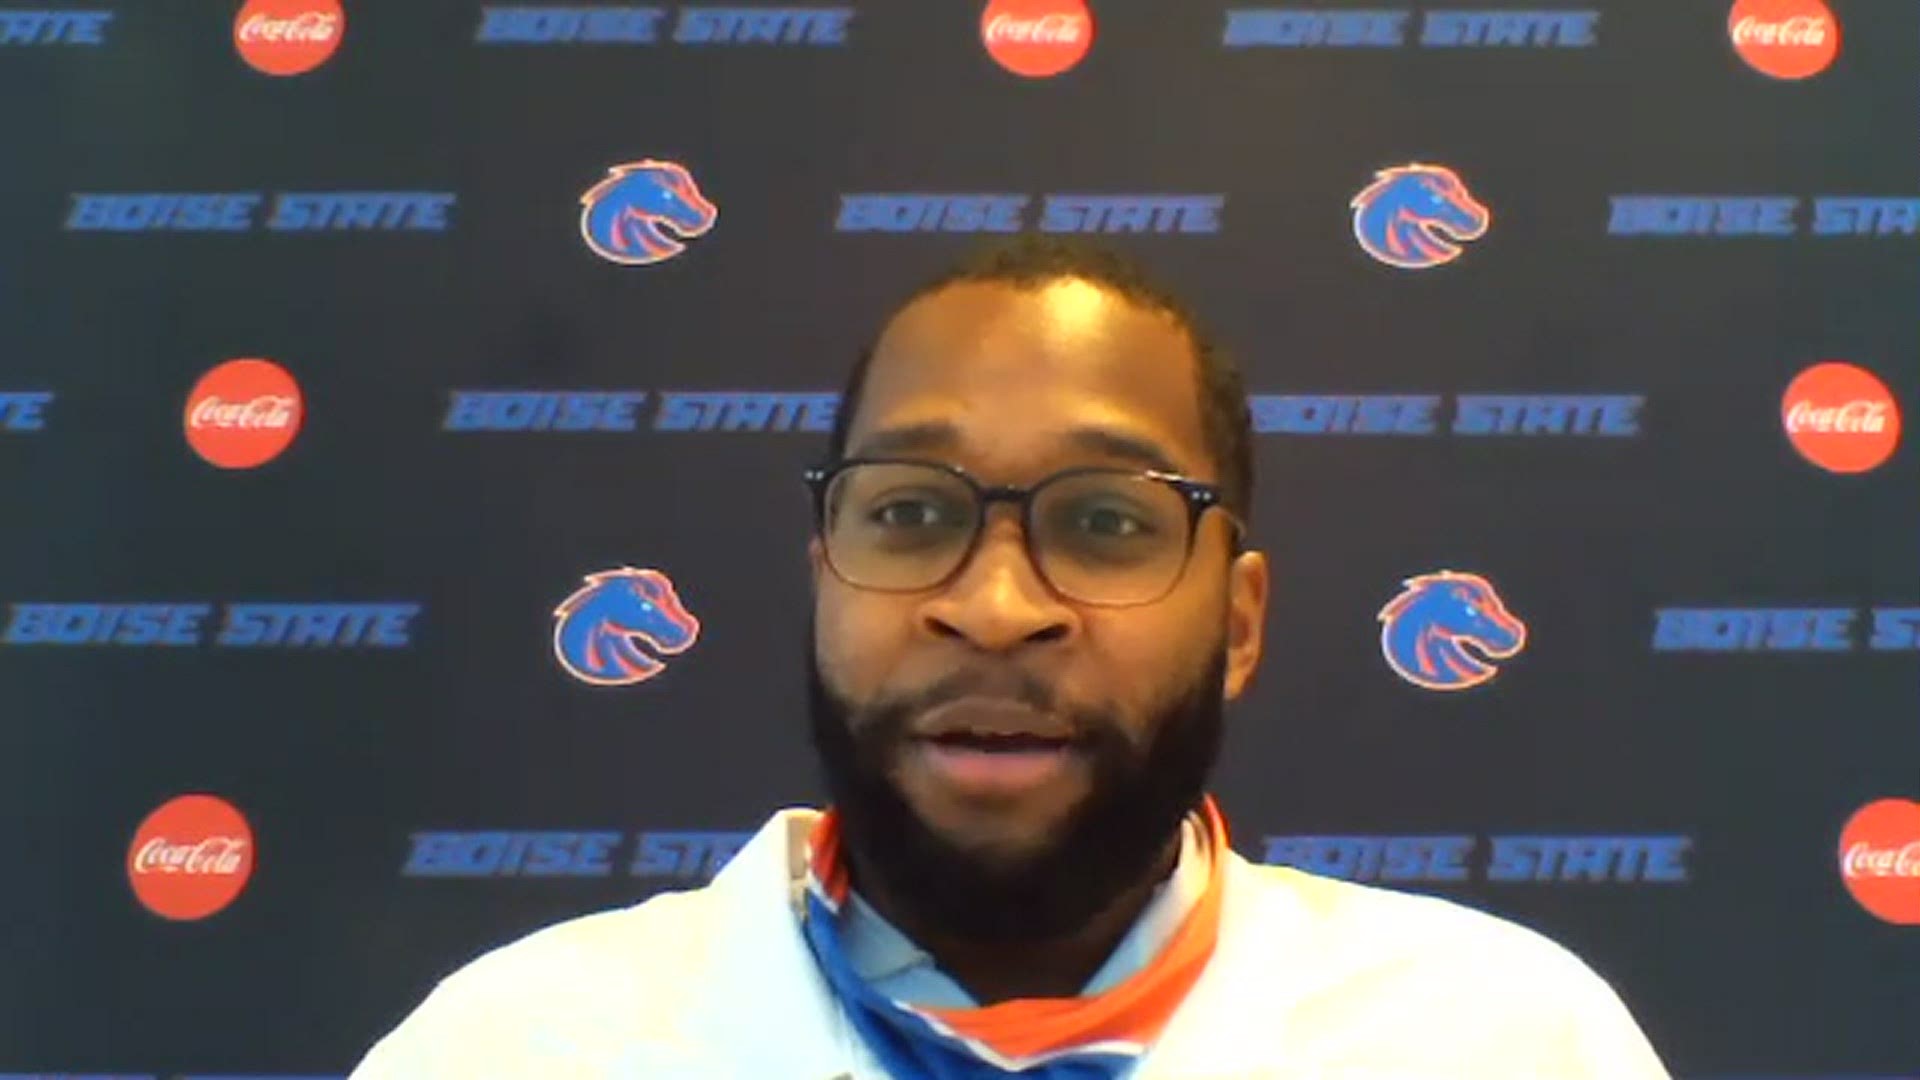 After stints at Oregon and the College of Idaho, the former graduate assistant is following Andy Avalos back to Boise to joining the staff as a defensive analyst.